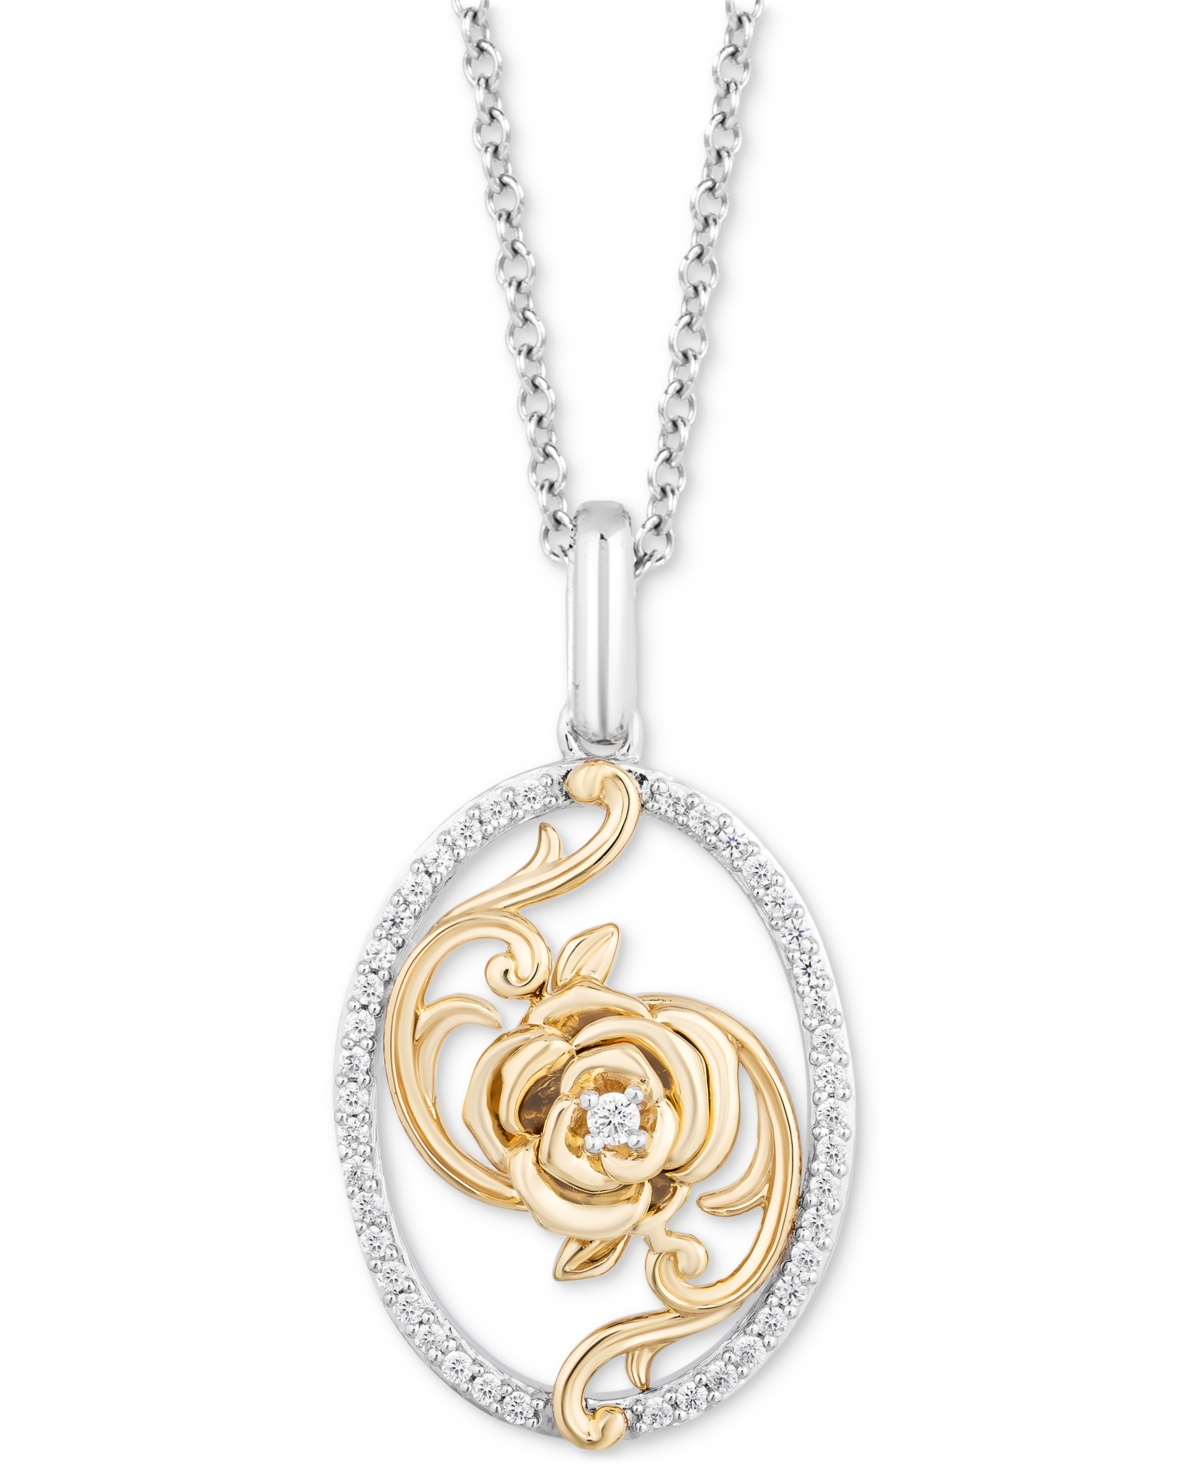 Diamond Oval Belle Rose Pendant Necklace (1/6 ct. t.w.) in Sterling Silver & 14k Gold - Two-Tone